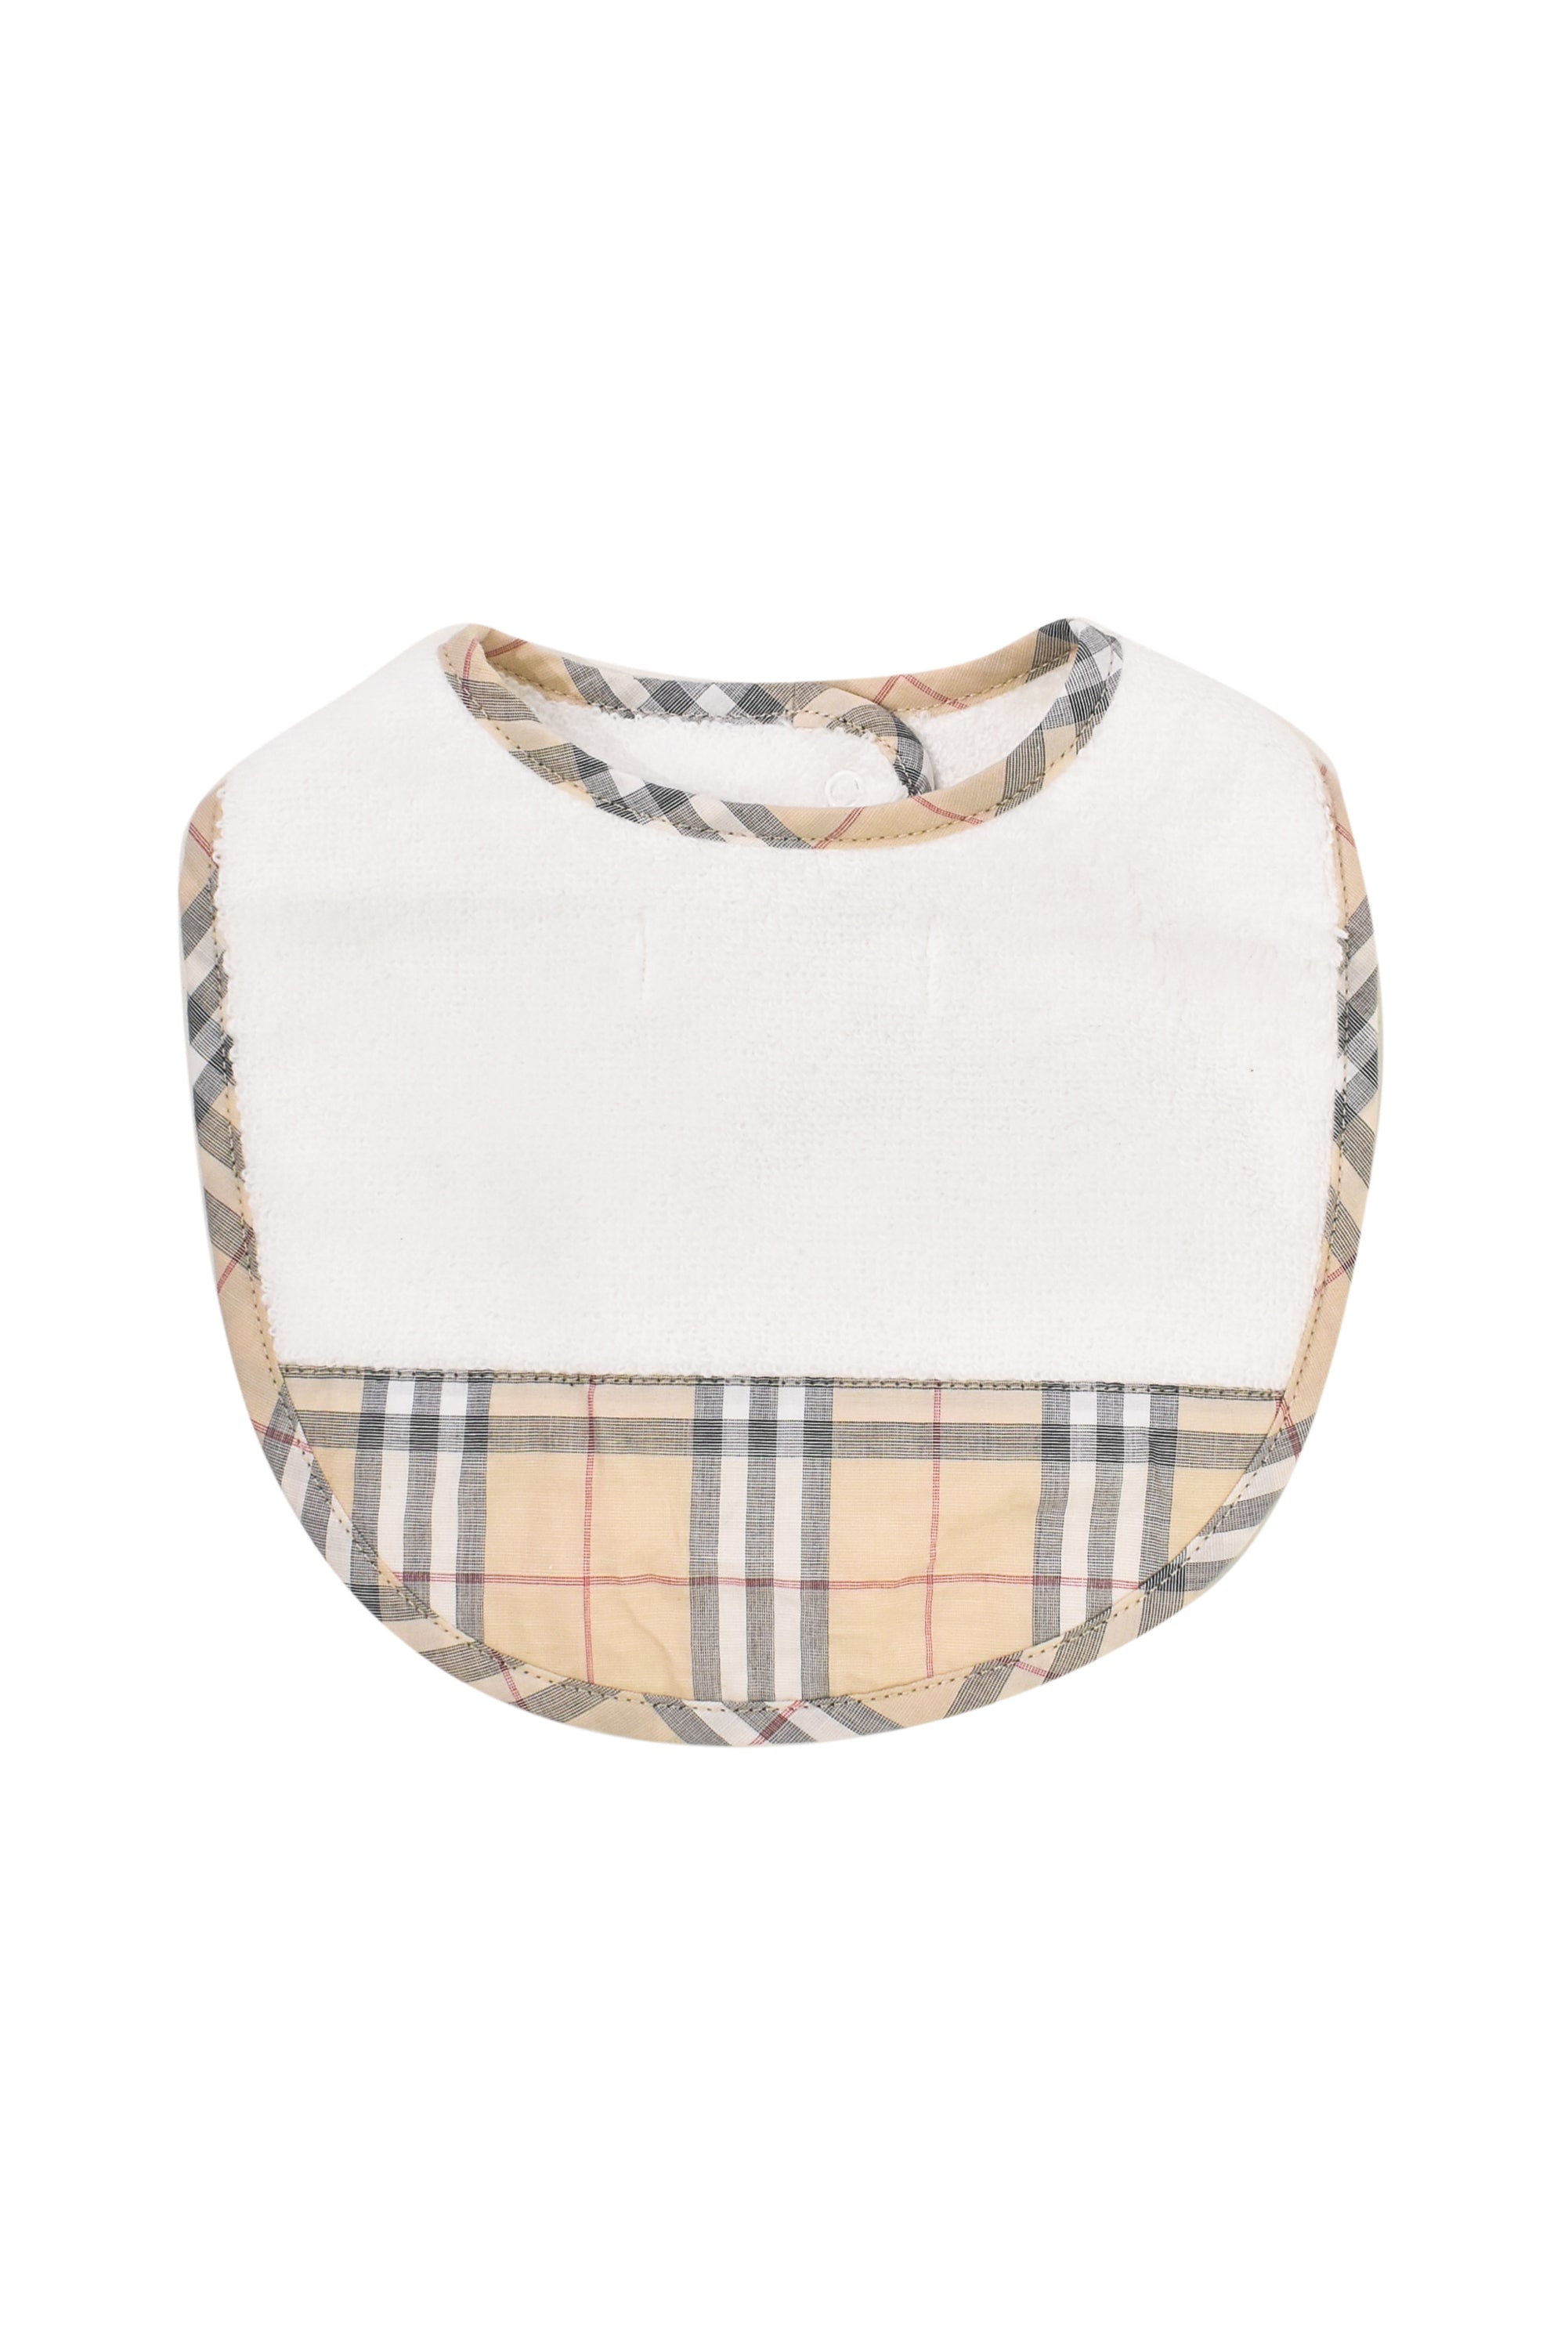 burberry bibs for baby